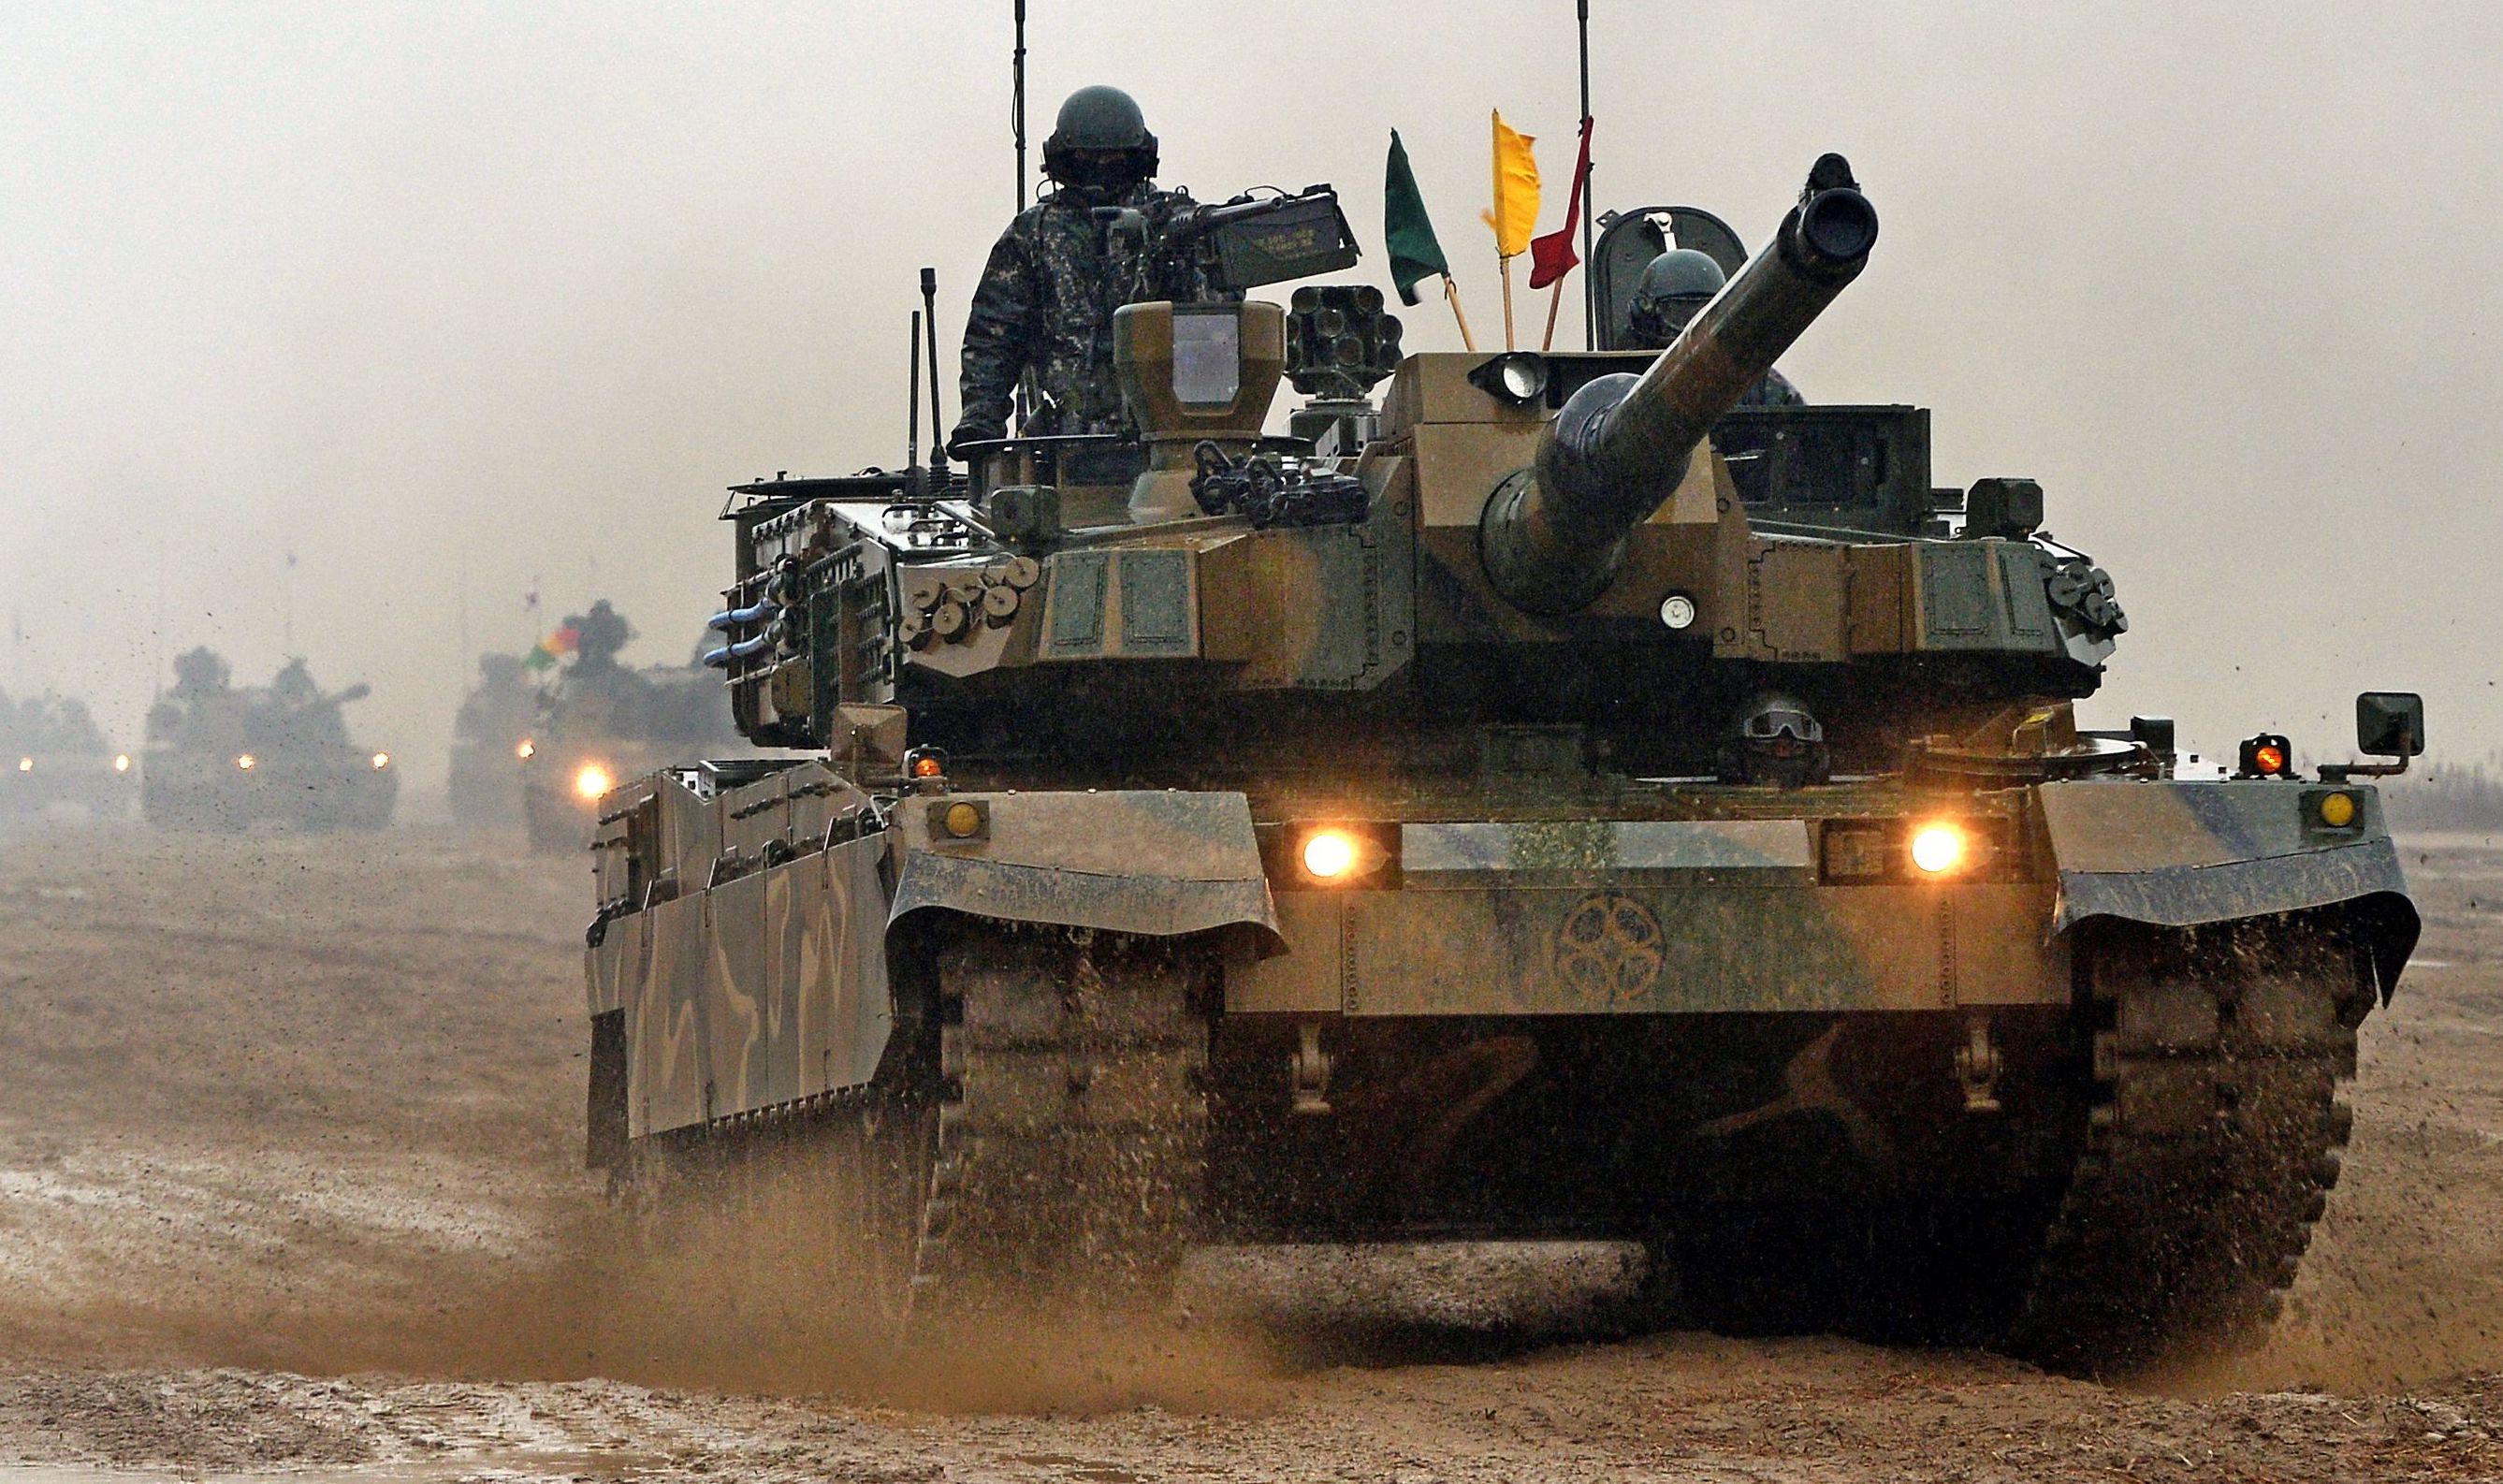 Korean K2 Black Panthers In Warsaw Poland Could Soon Field The World S Most Capable Battle Tanks Under 9 Billion Deal